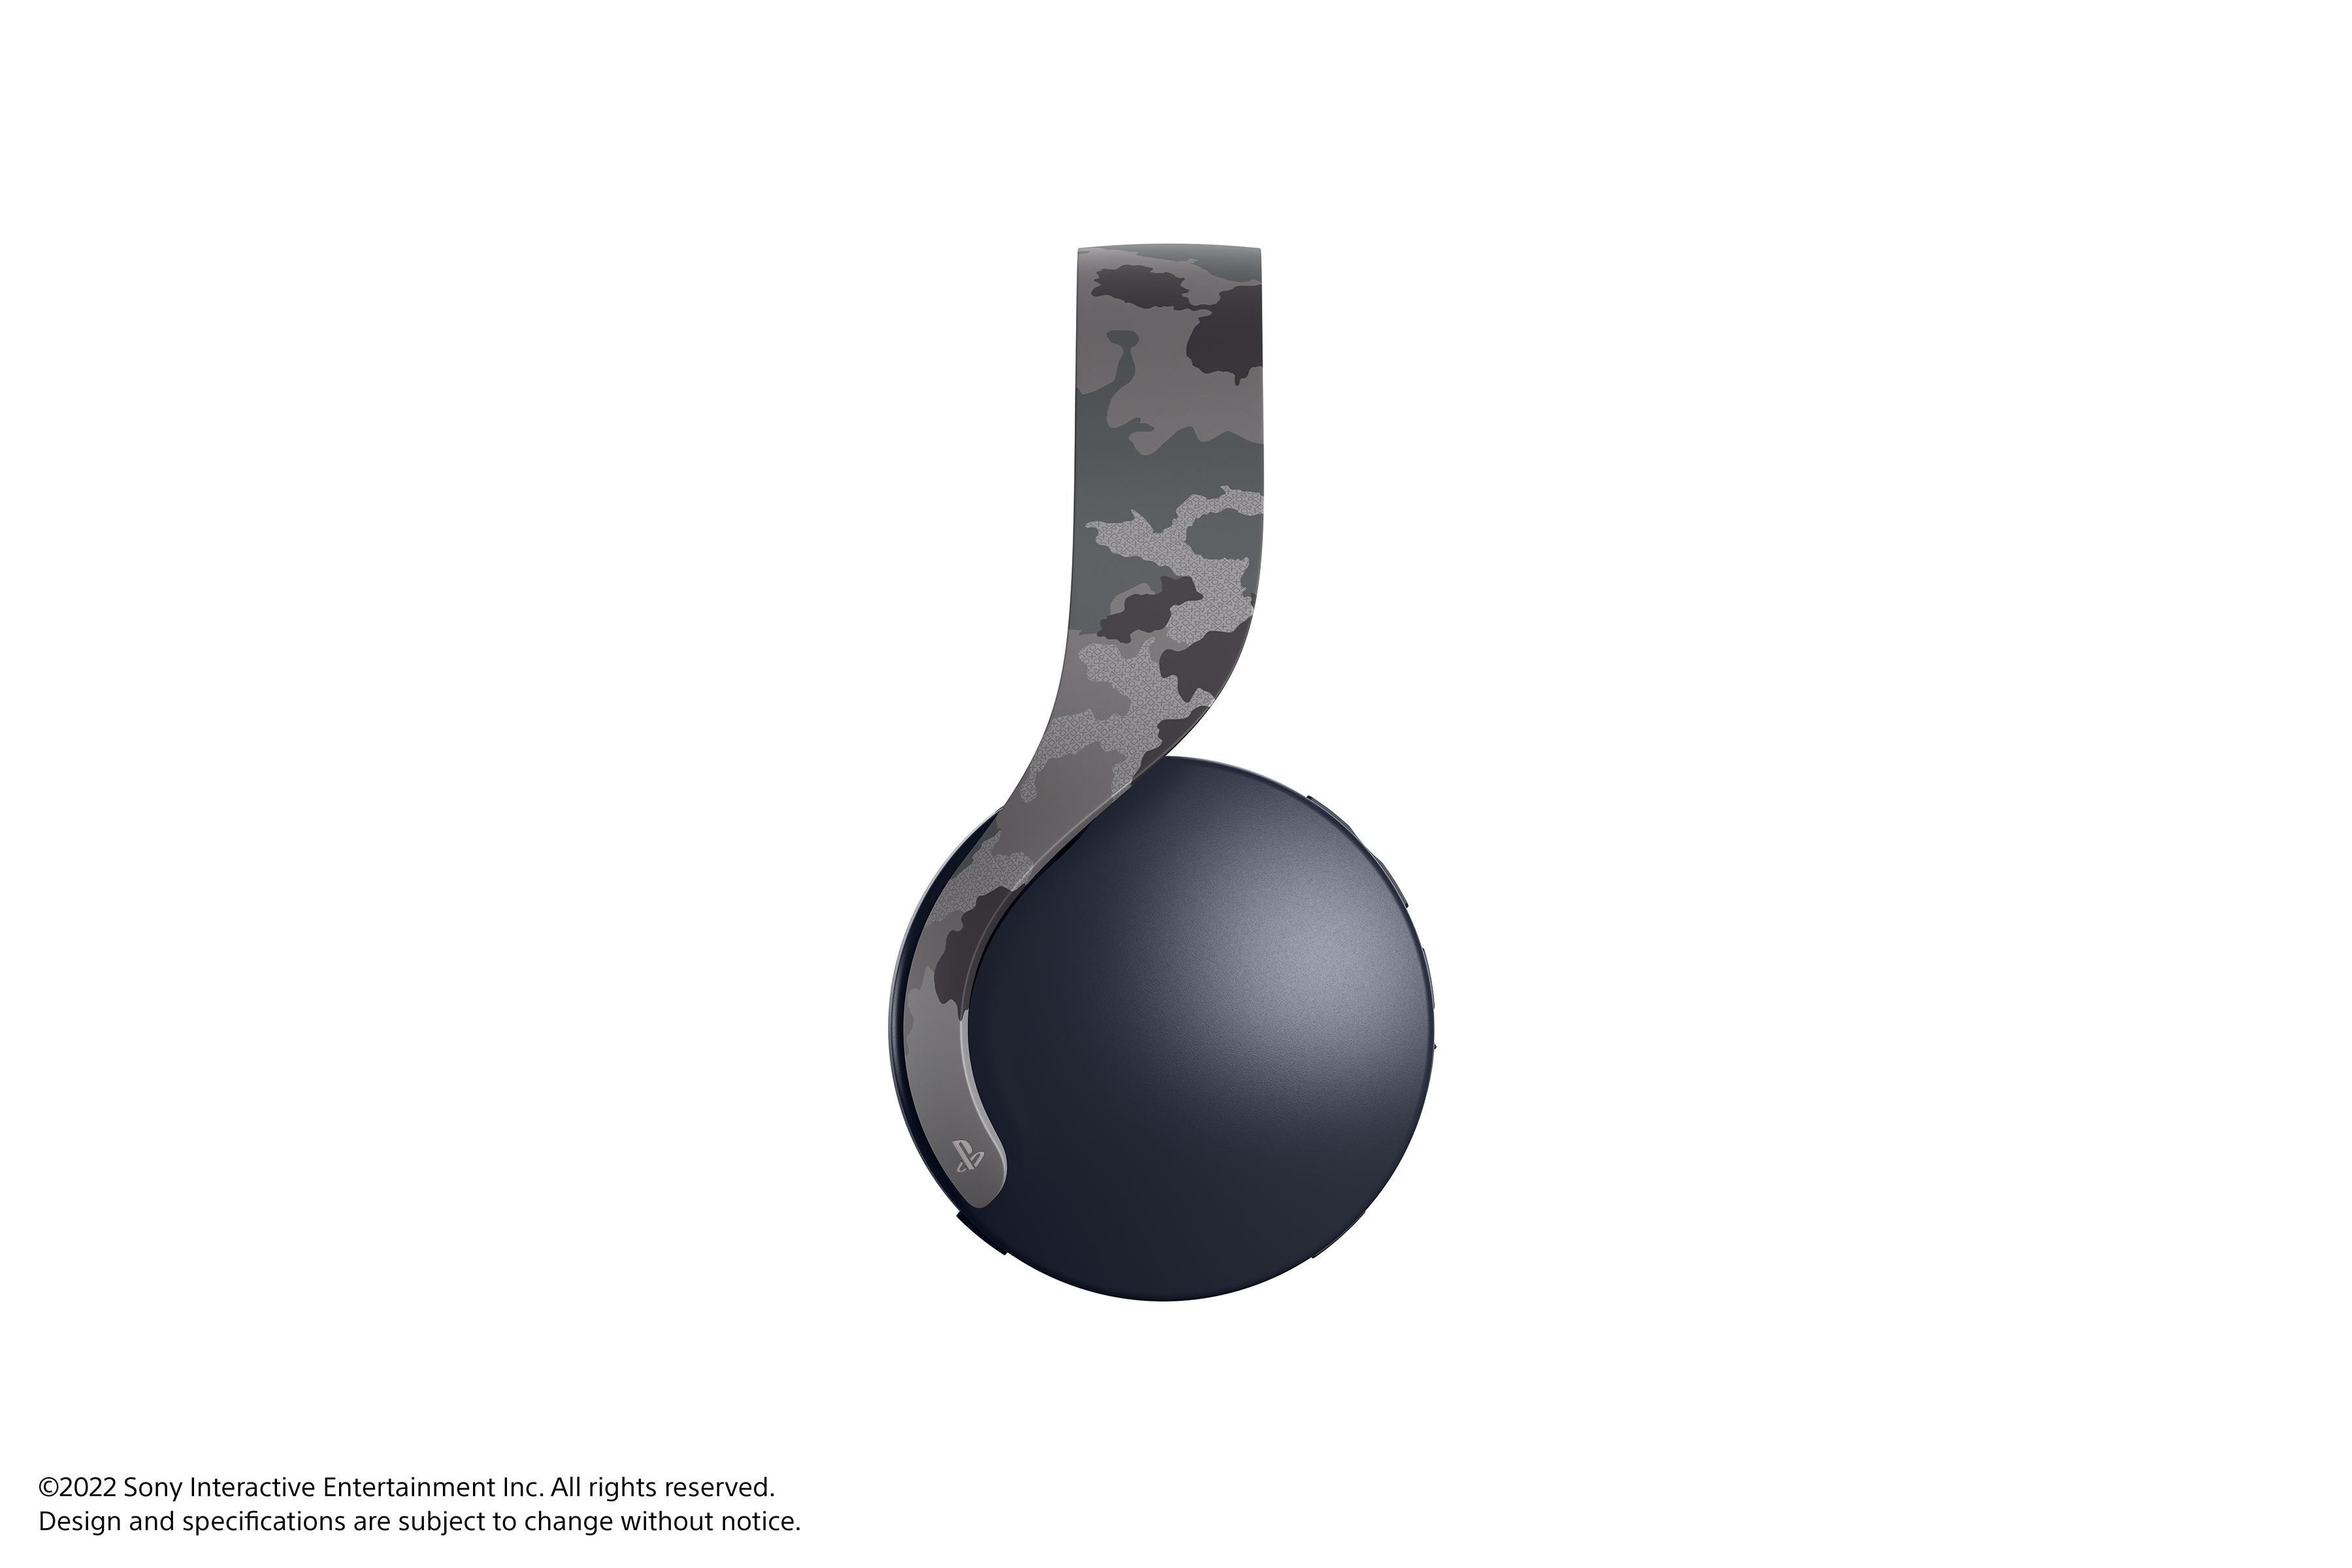 SONY PULSE 3D™, Grau/Camouflage Bluetooth Over-ear Gaming Headset